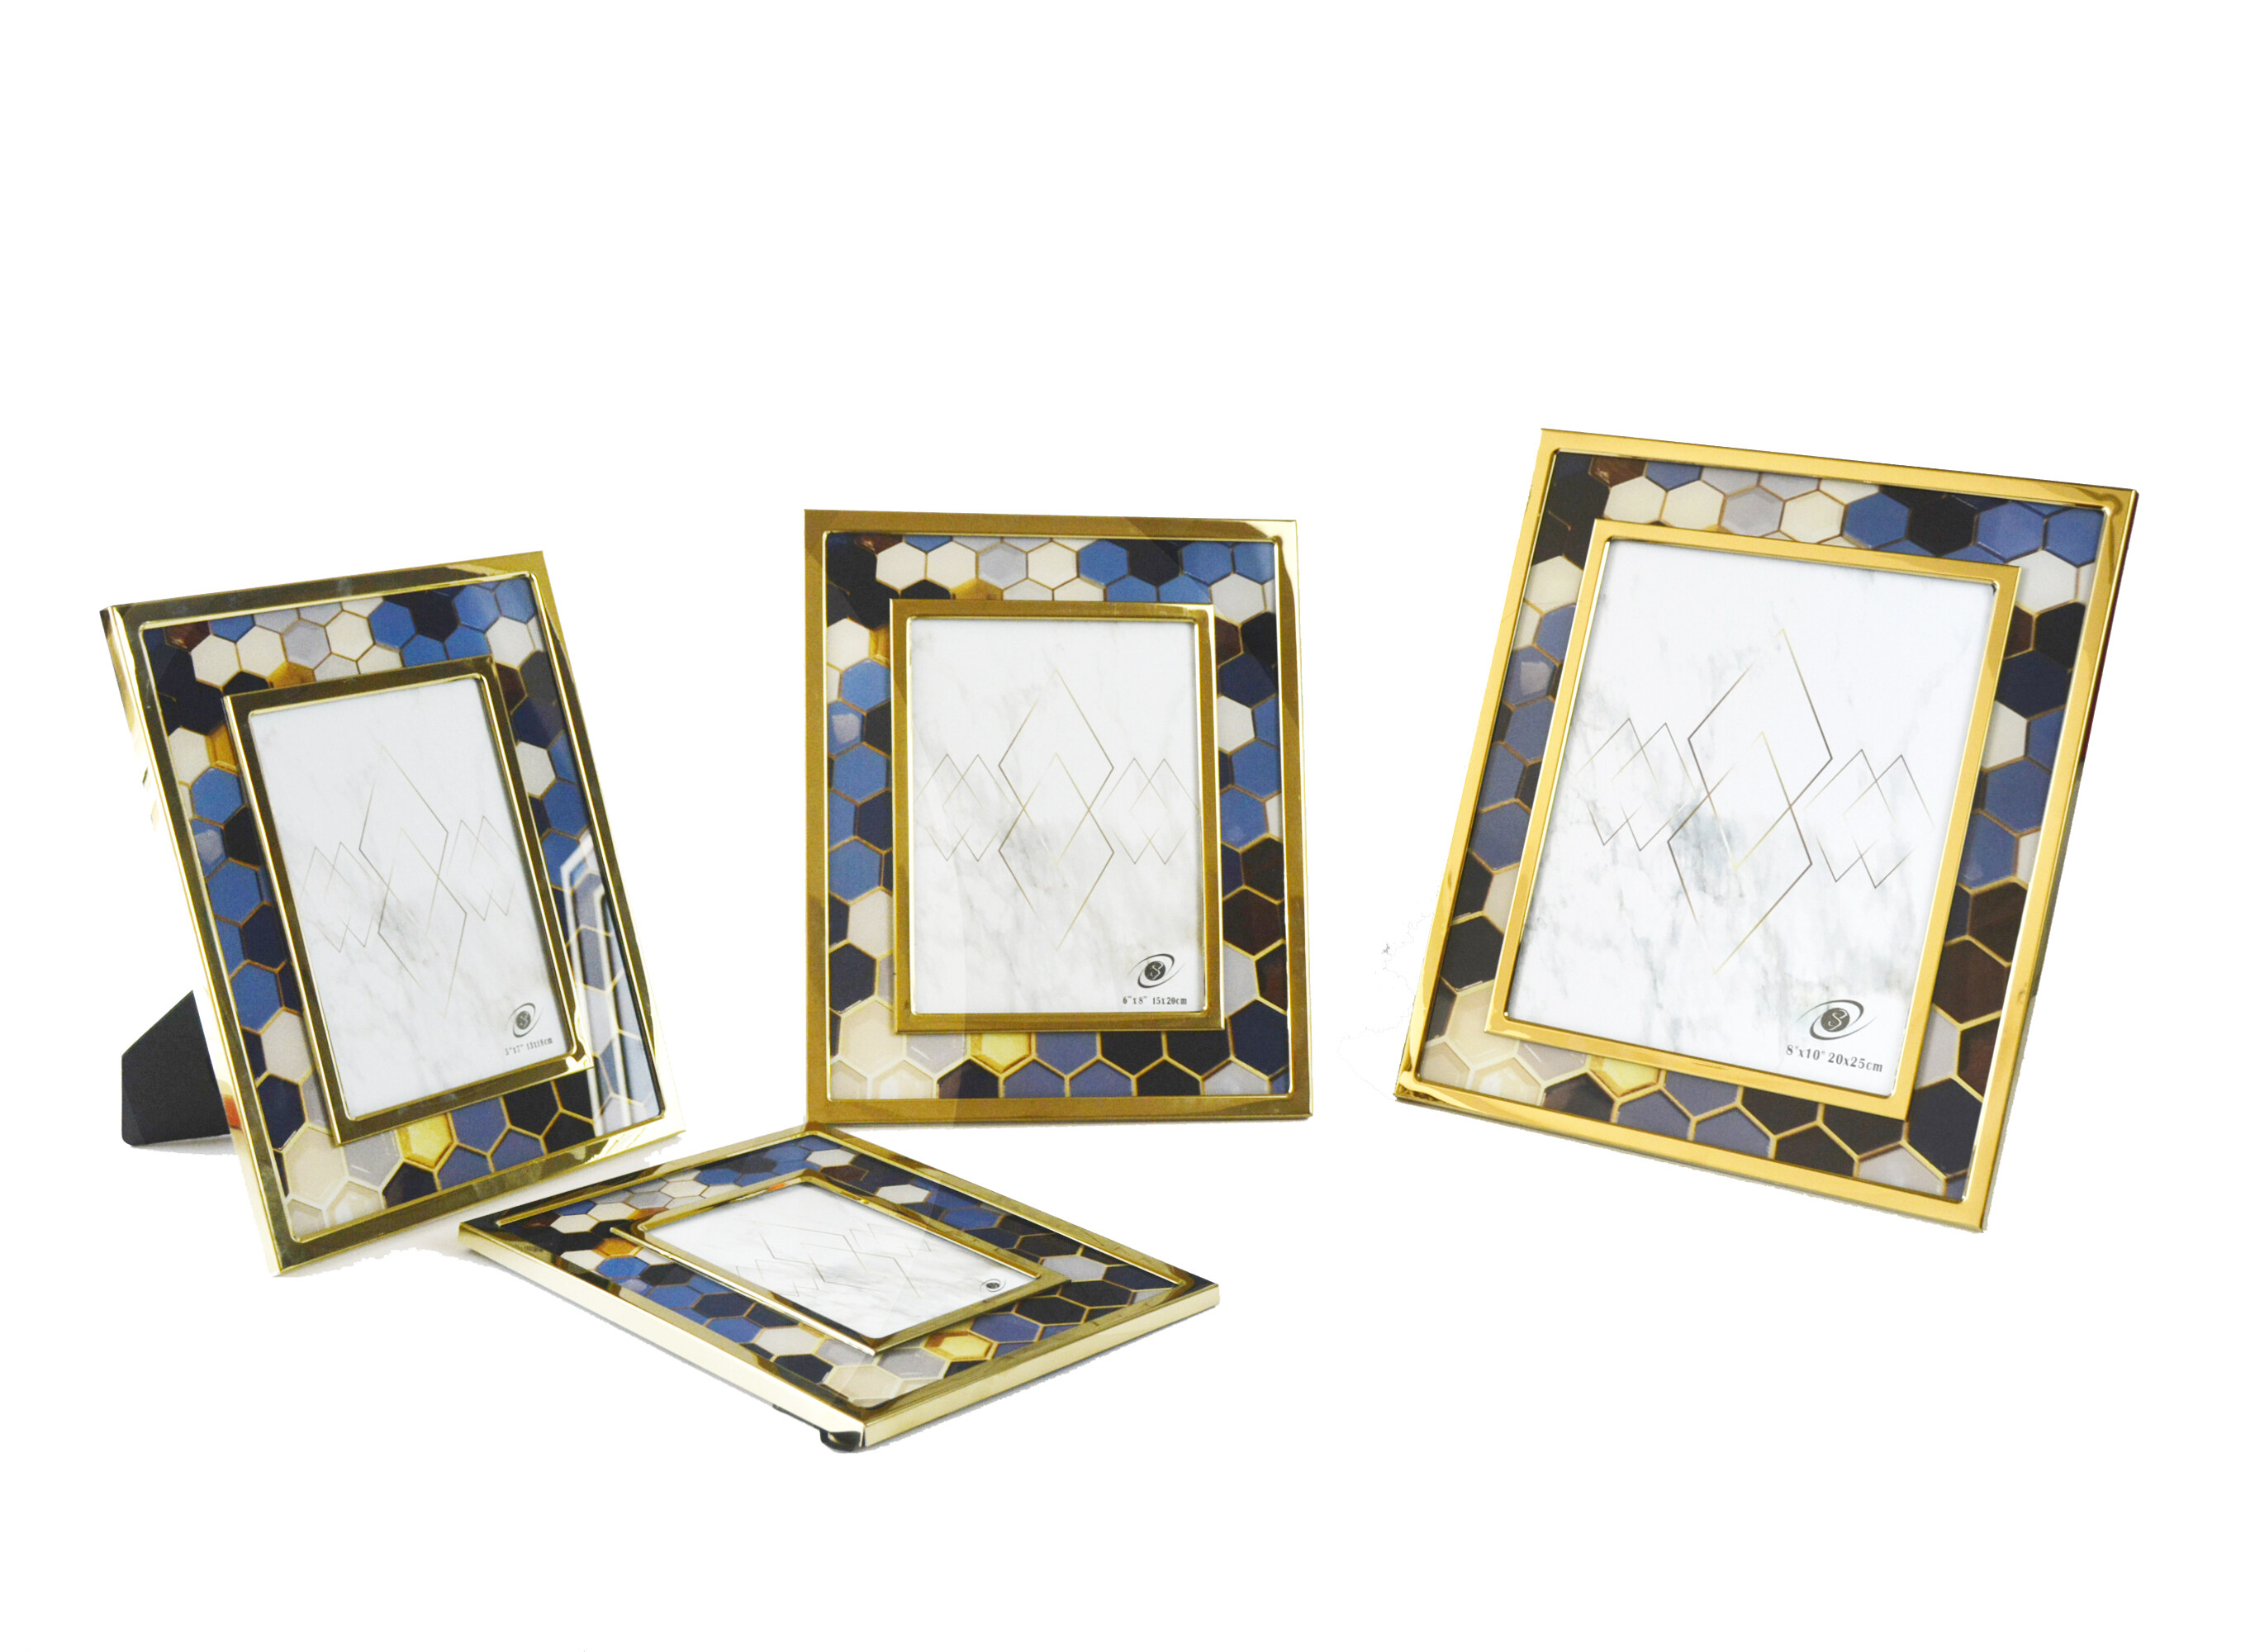 8x10" metal photo frame with double frames of gold aluminum alloy